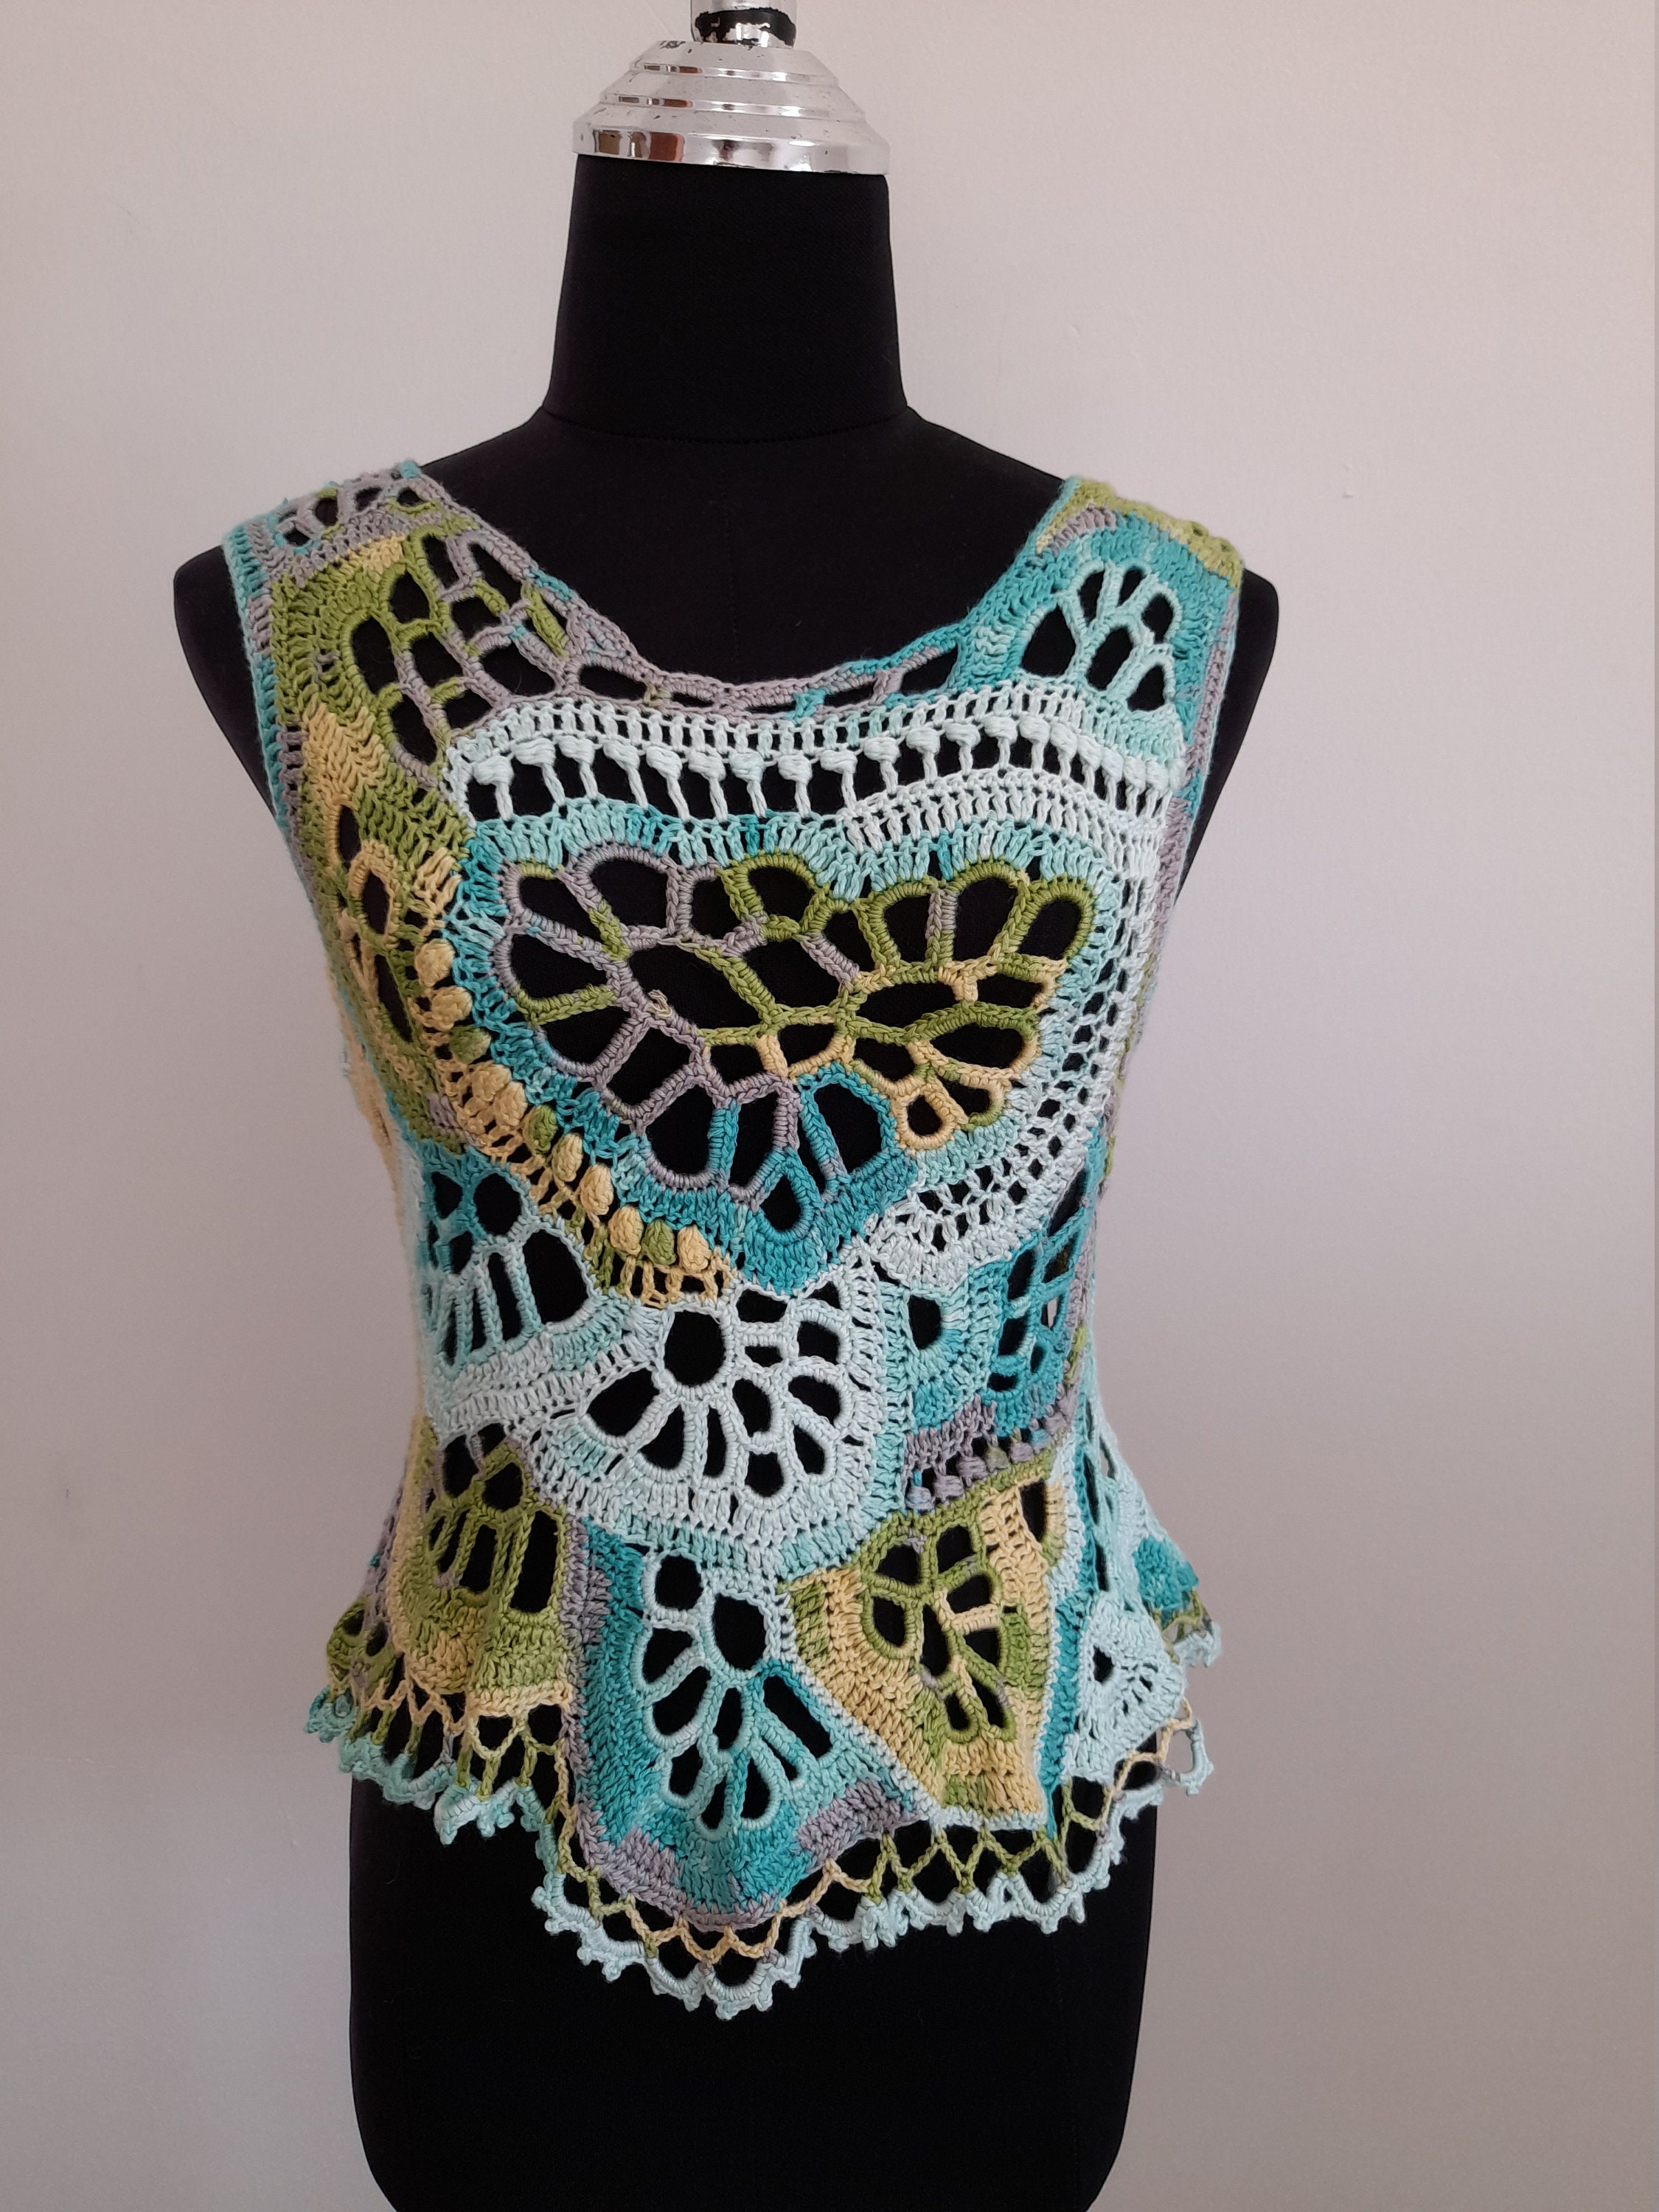 Vintage 60s Crop Top  Green and Blue Floral Tank Top  Hand Made by Talbott for Mark Fore & Strike Sleeveless Blouse  One of a Kind